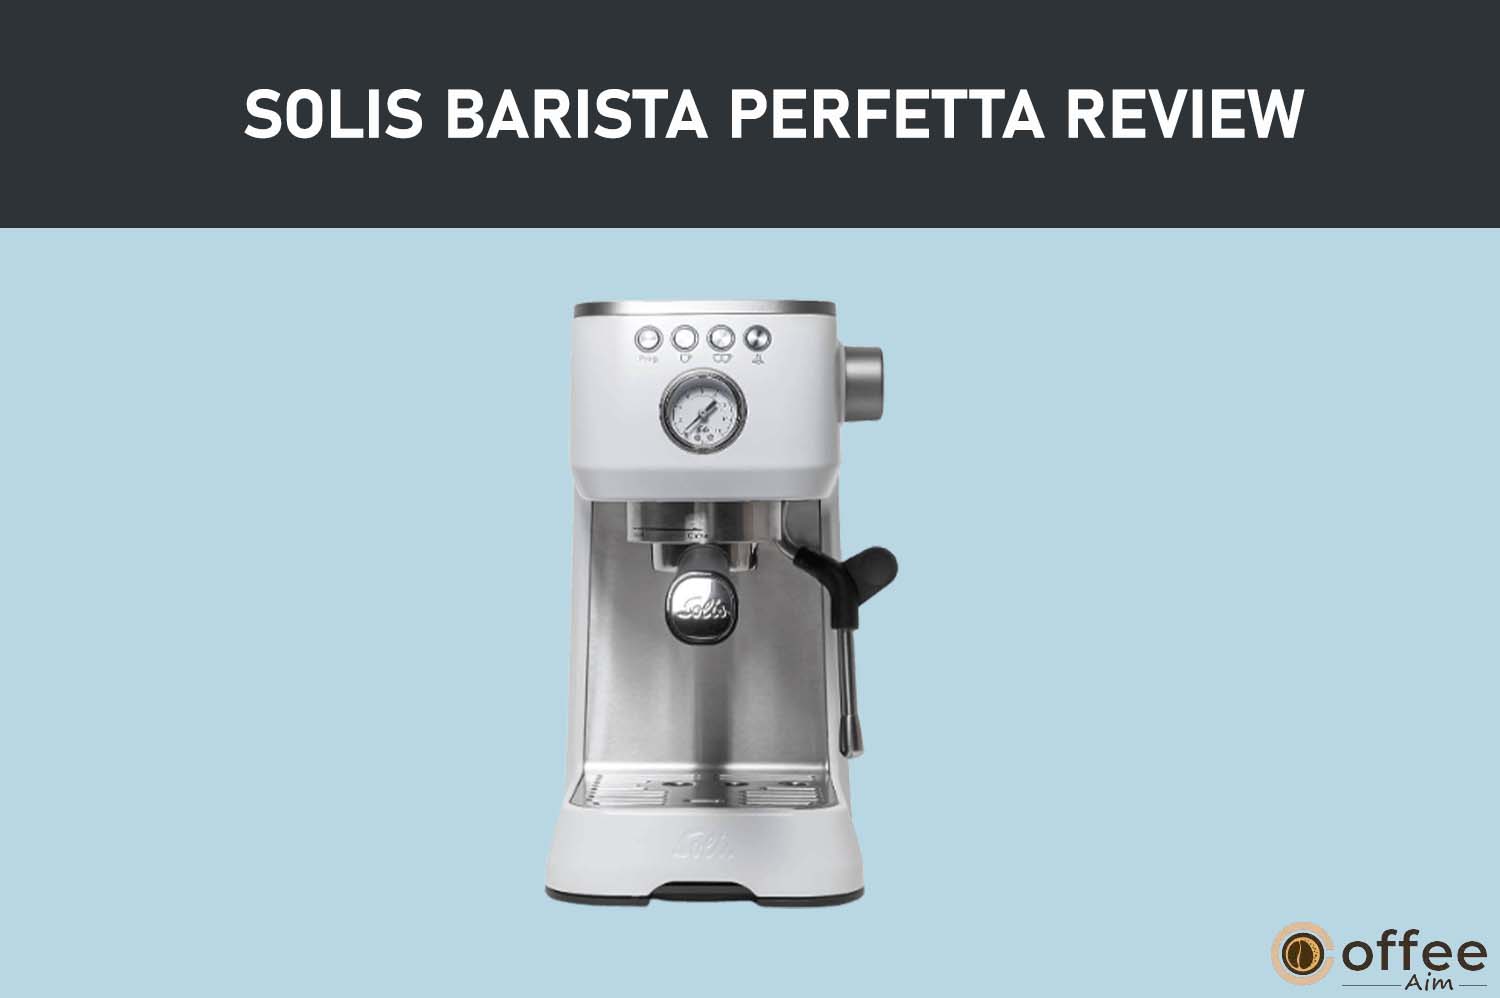 Featured image for the article "Solis Barista Perfetta Review"